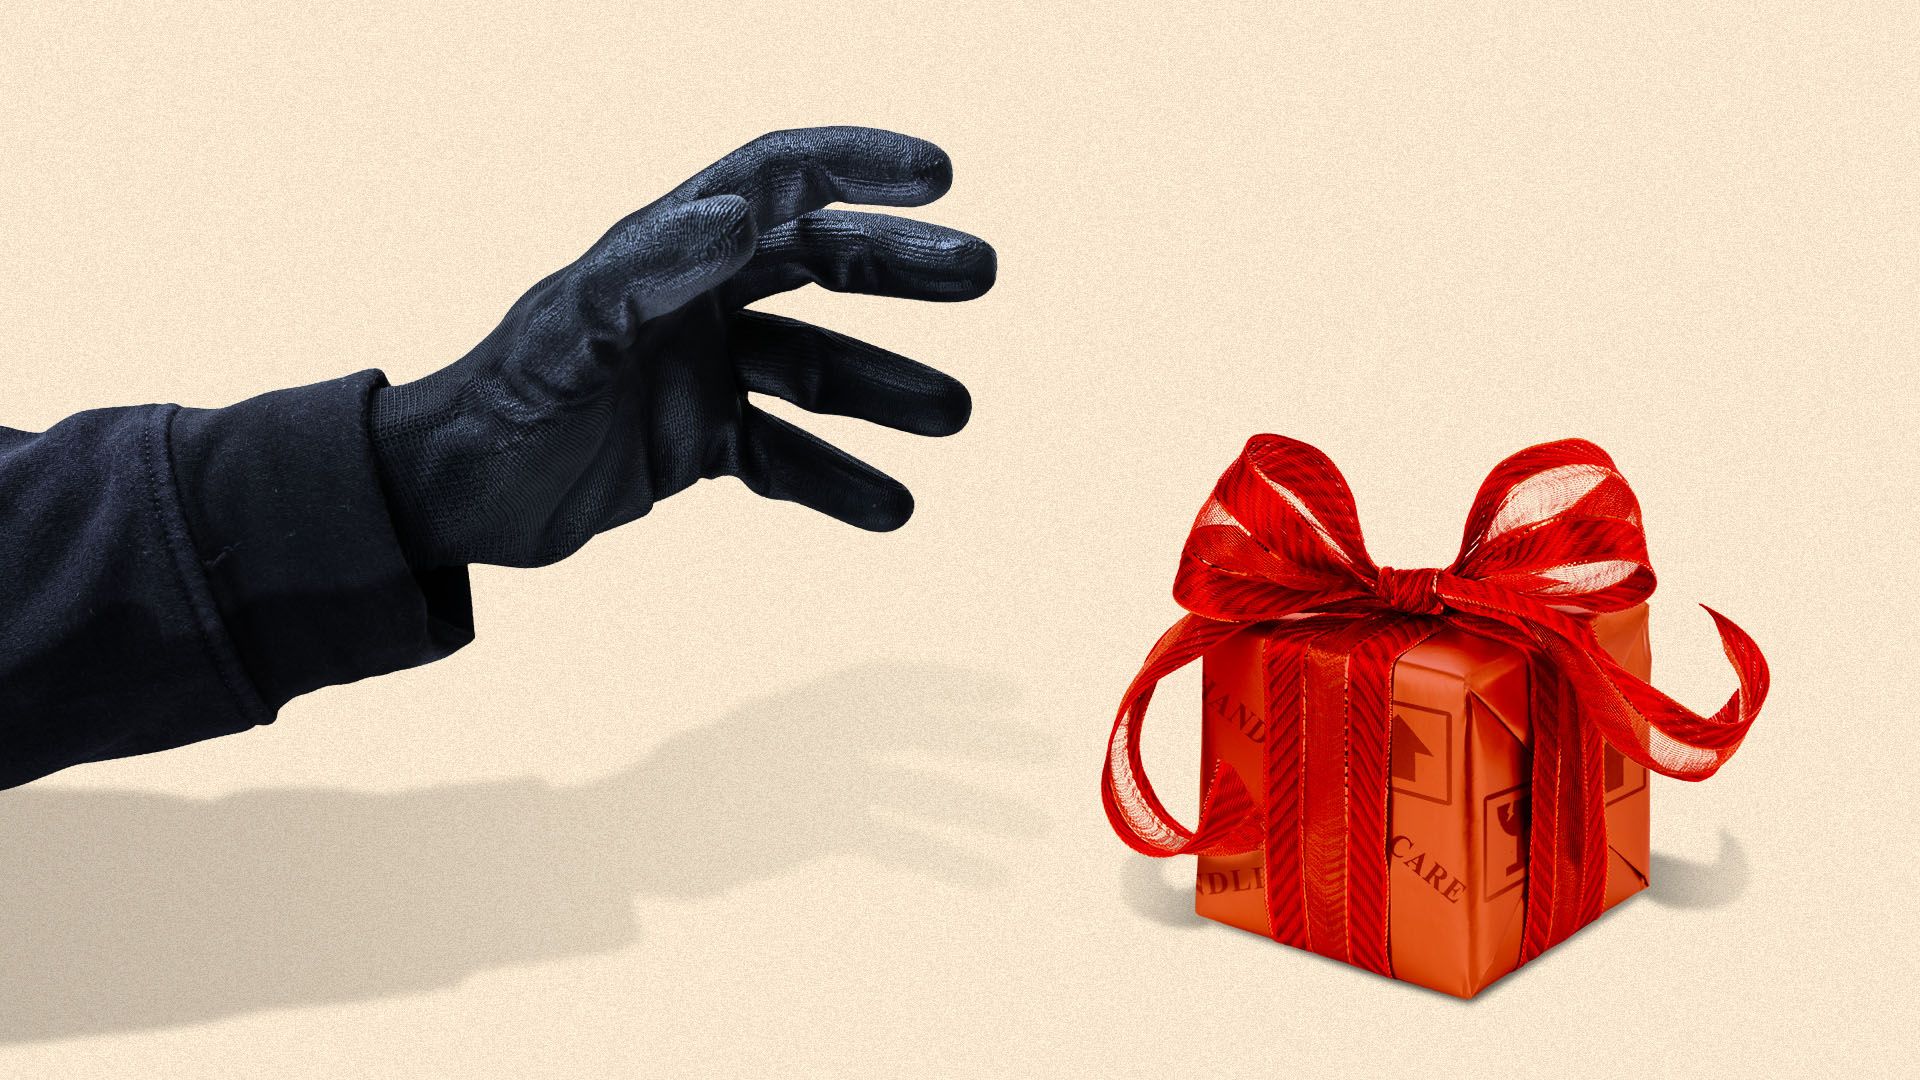 Illustration of a holiday gift covered in package delivery stamps with a gloved hand about to grab it